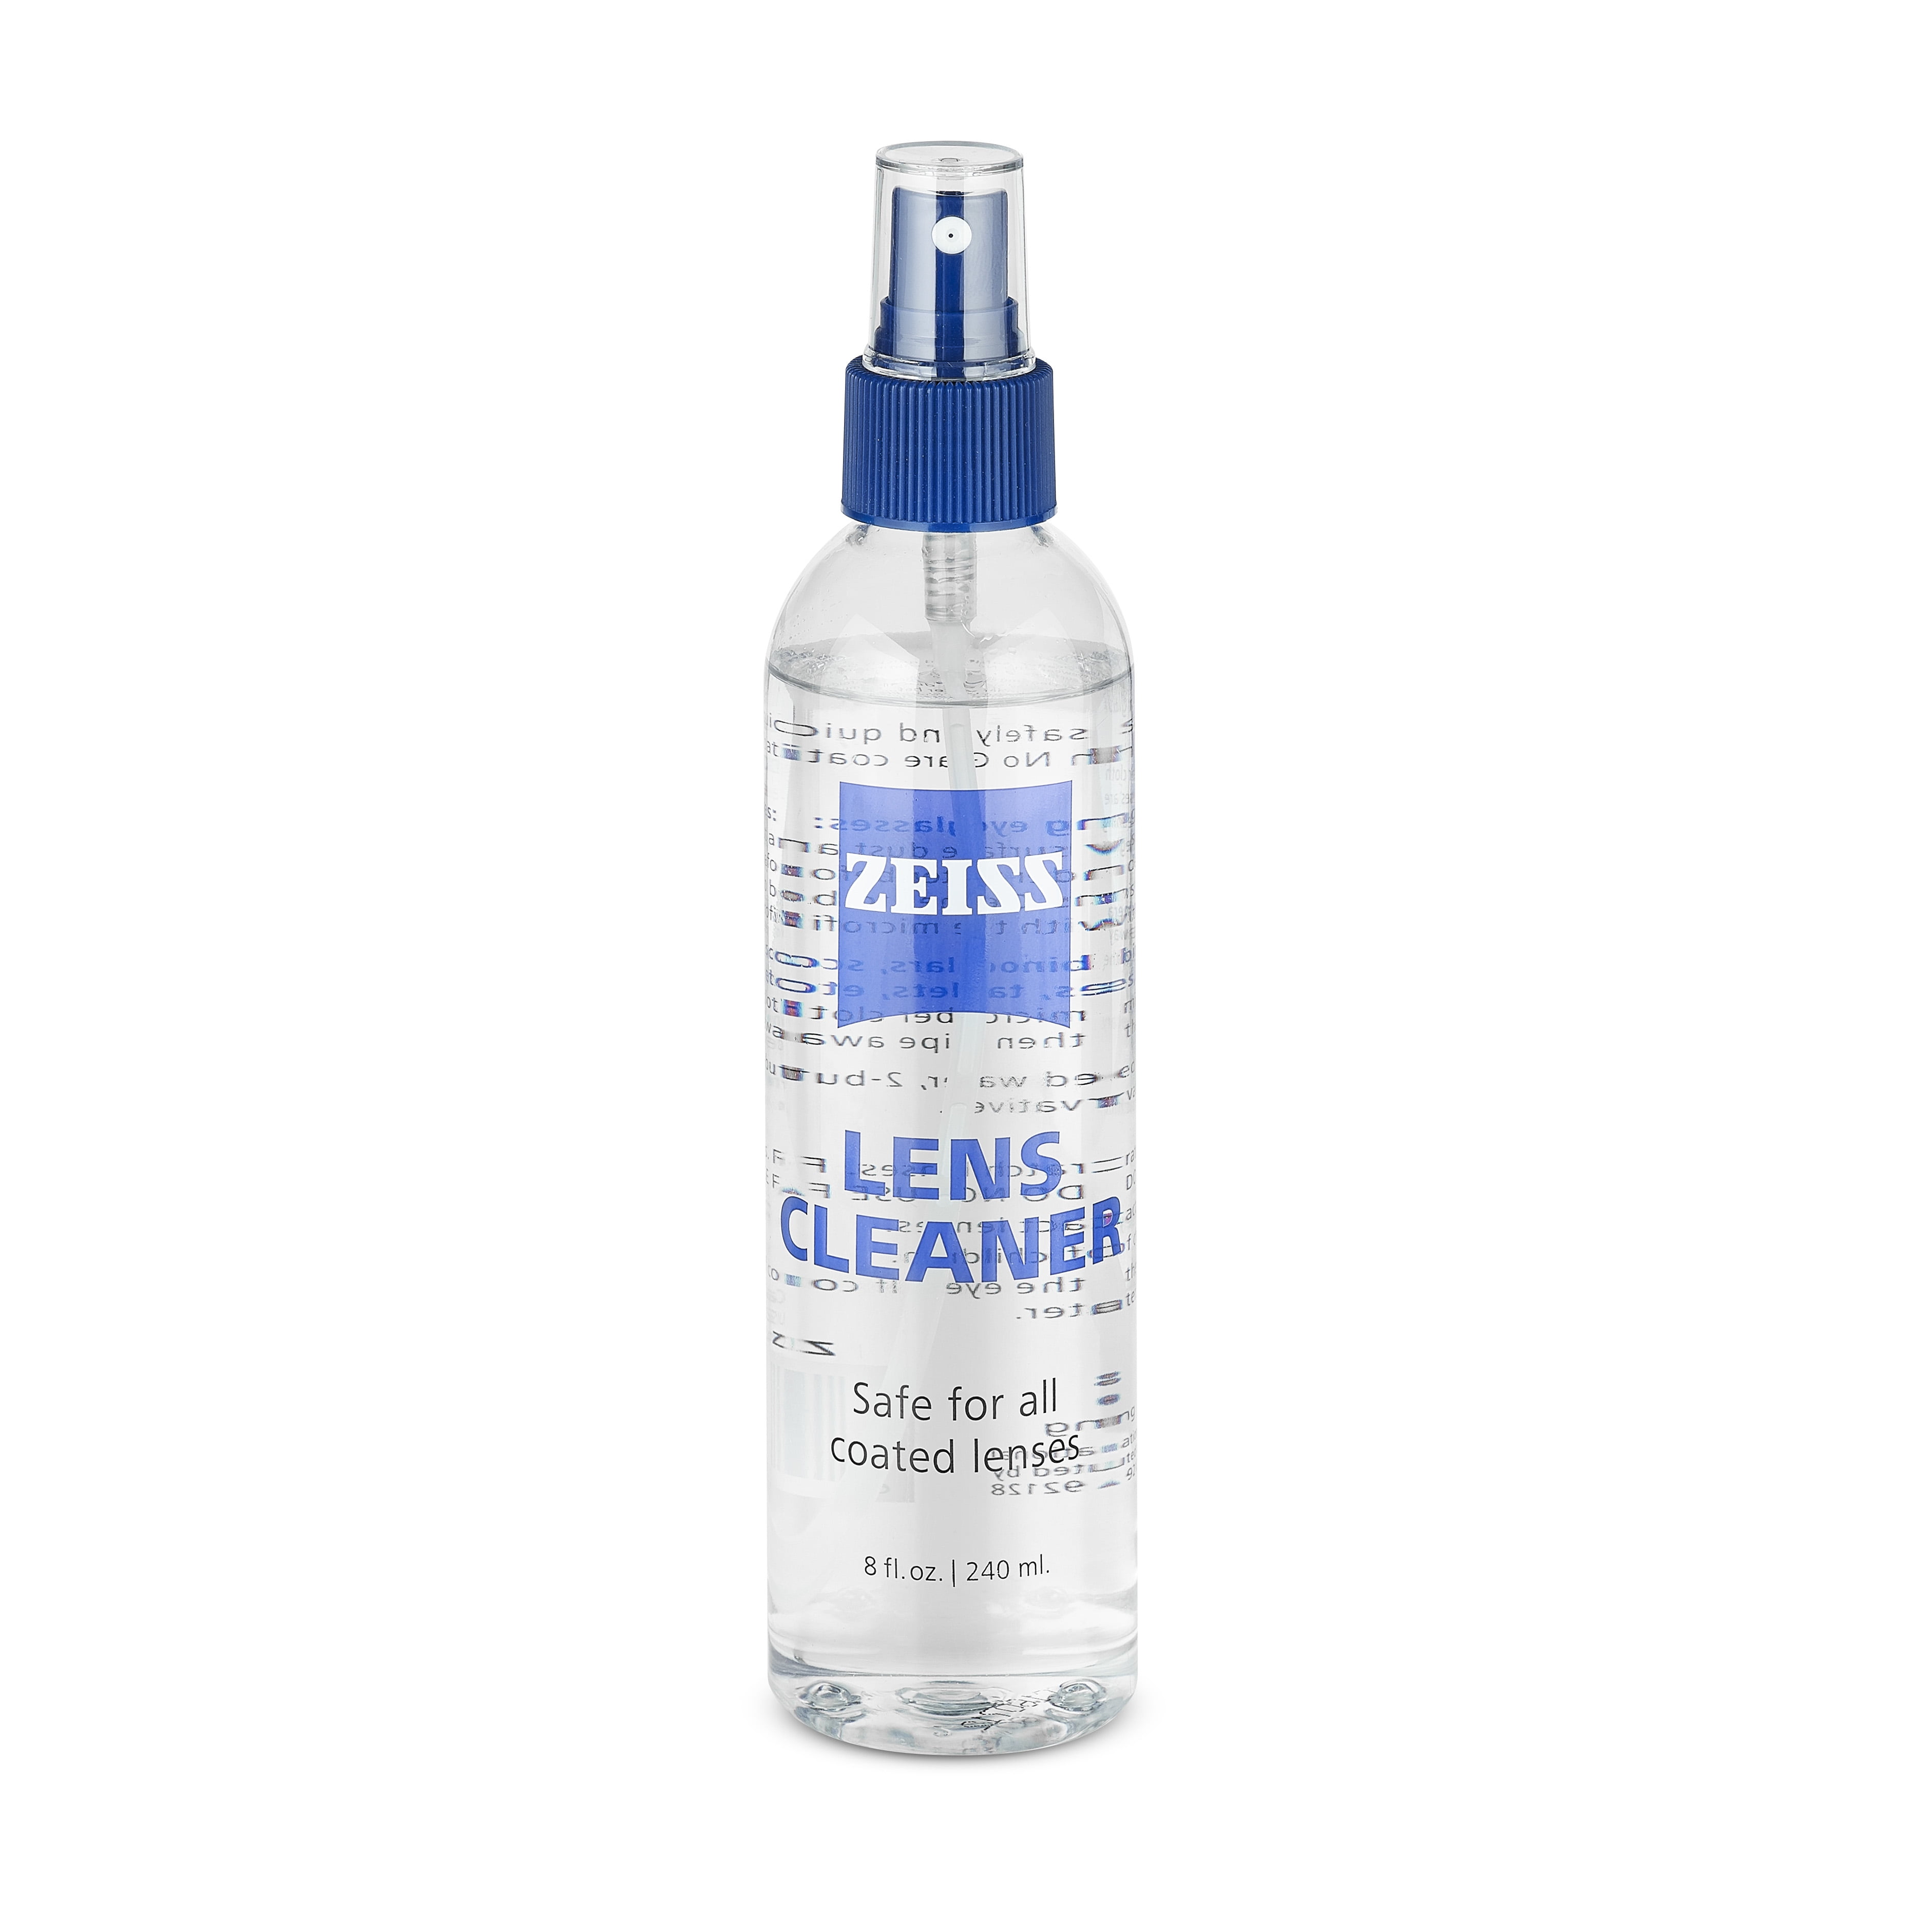 Lens Scratch Removal Spray,Eye Glass Windshield Glass Repair Liquid,Lens  Scratch Remover, Glasses Cleaner Spray for Sunglasses Screen Cleaner Tools